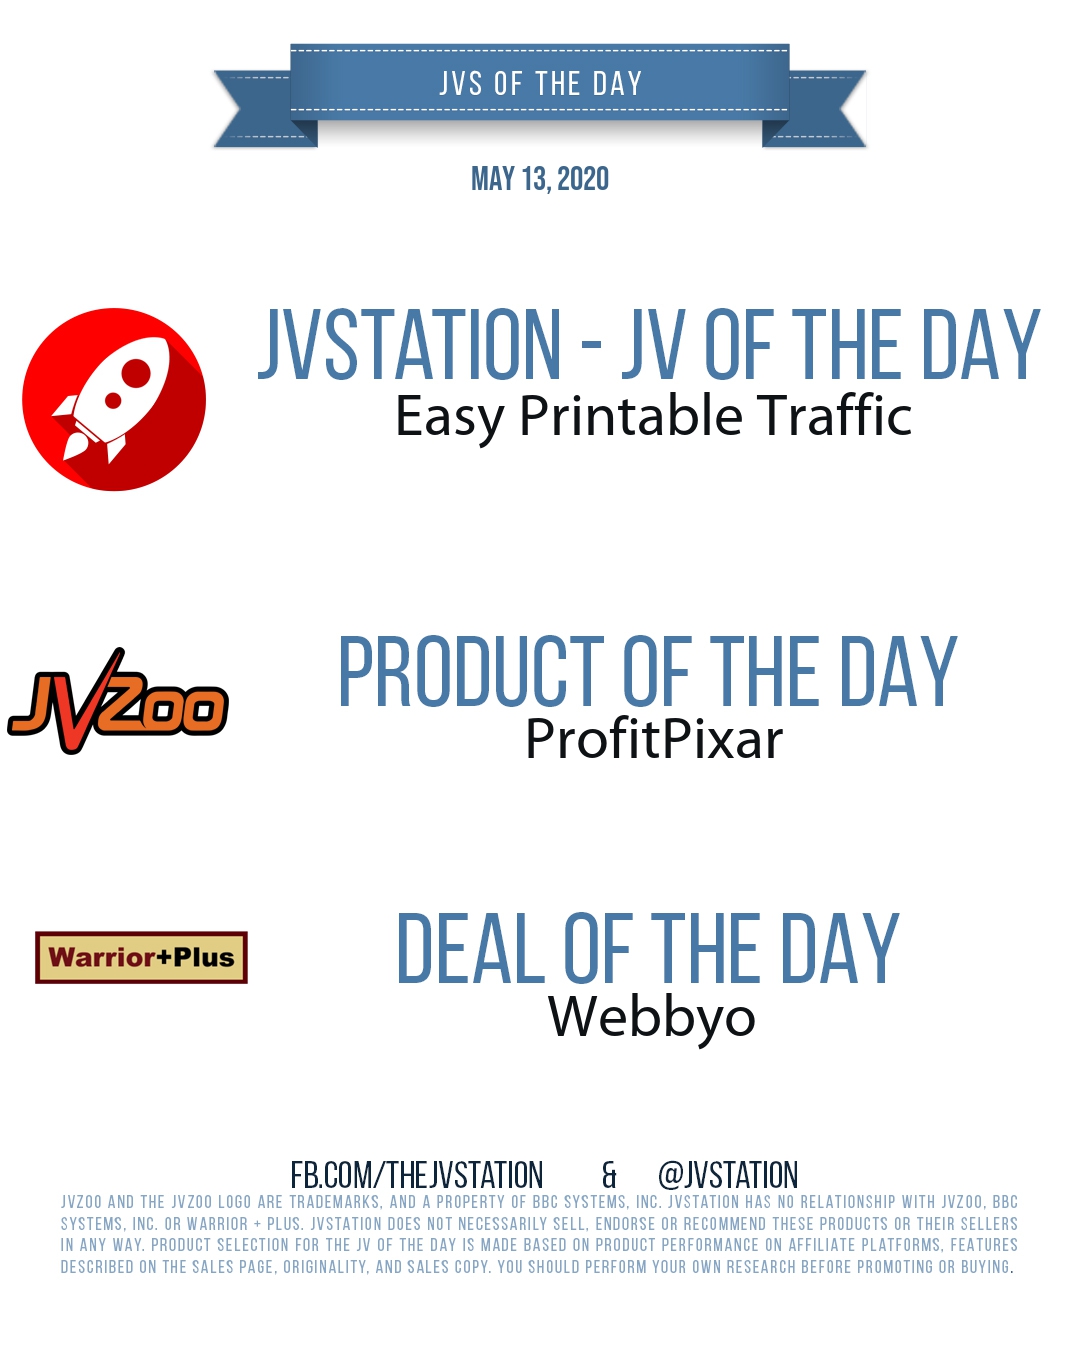 JVs of the day - May 13, 2020